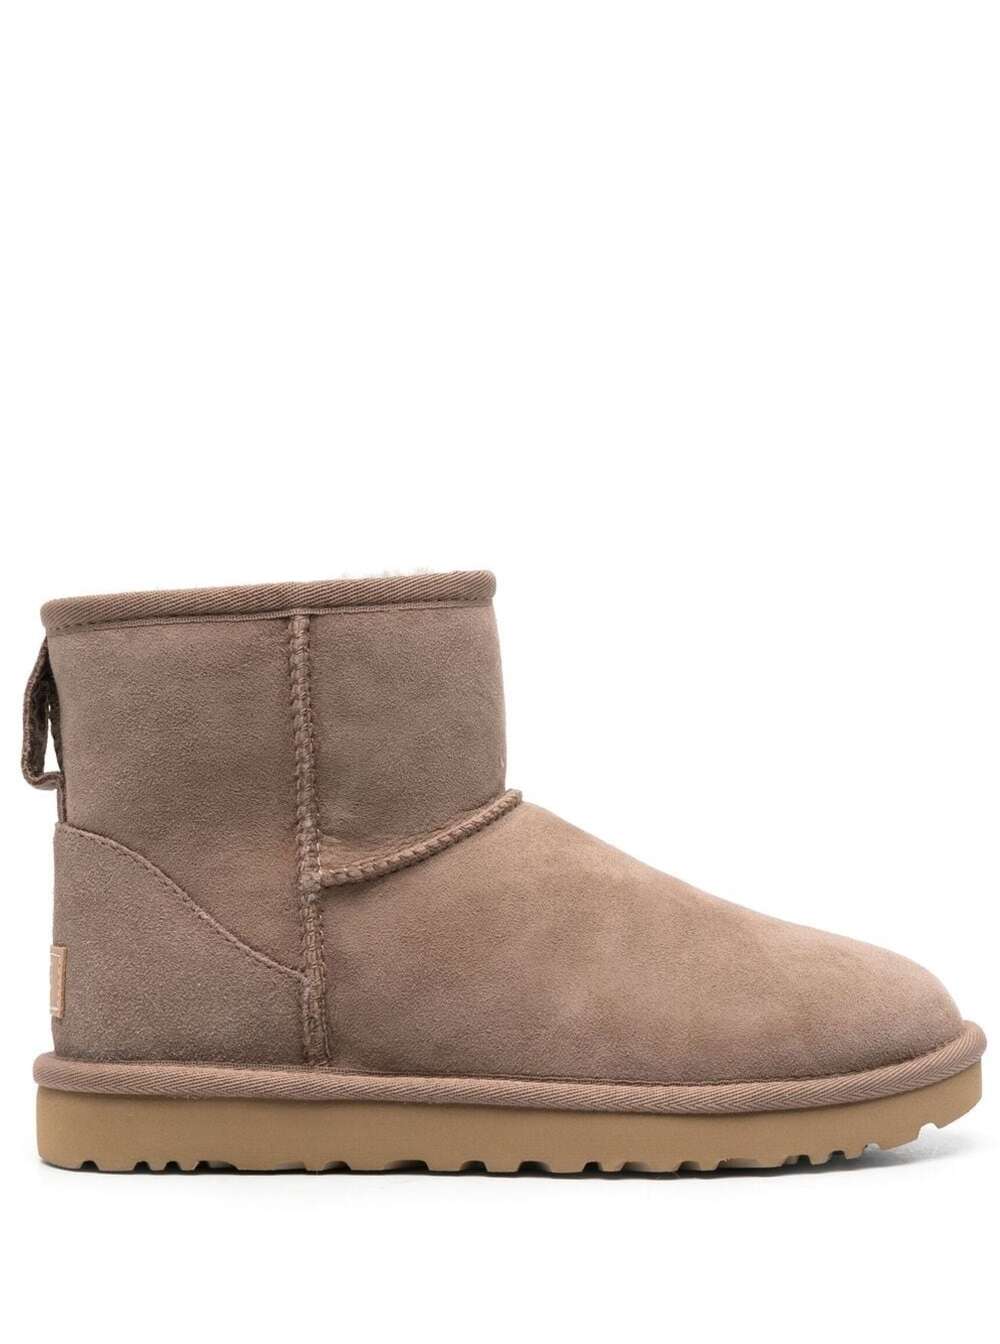 Beige Ankle Boots In Reverse Mutton With Treadlite Flat Sole By Ugg